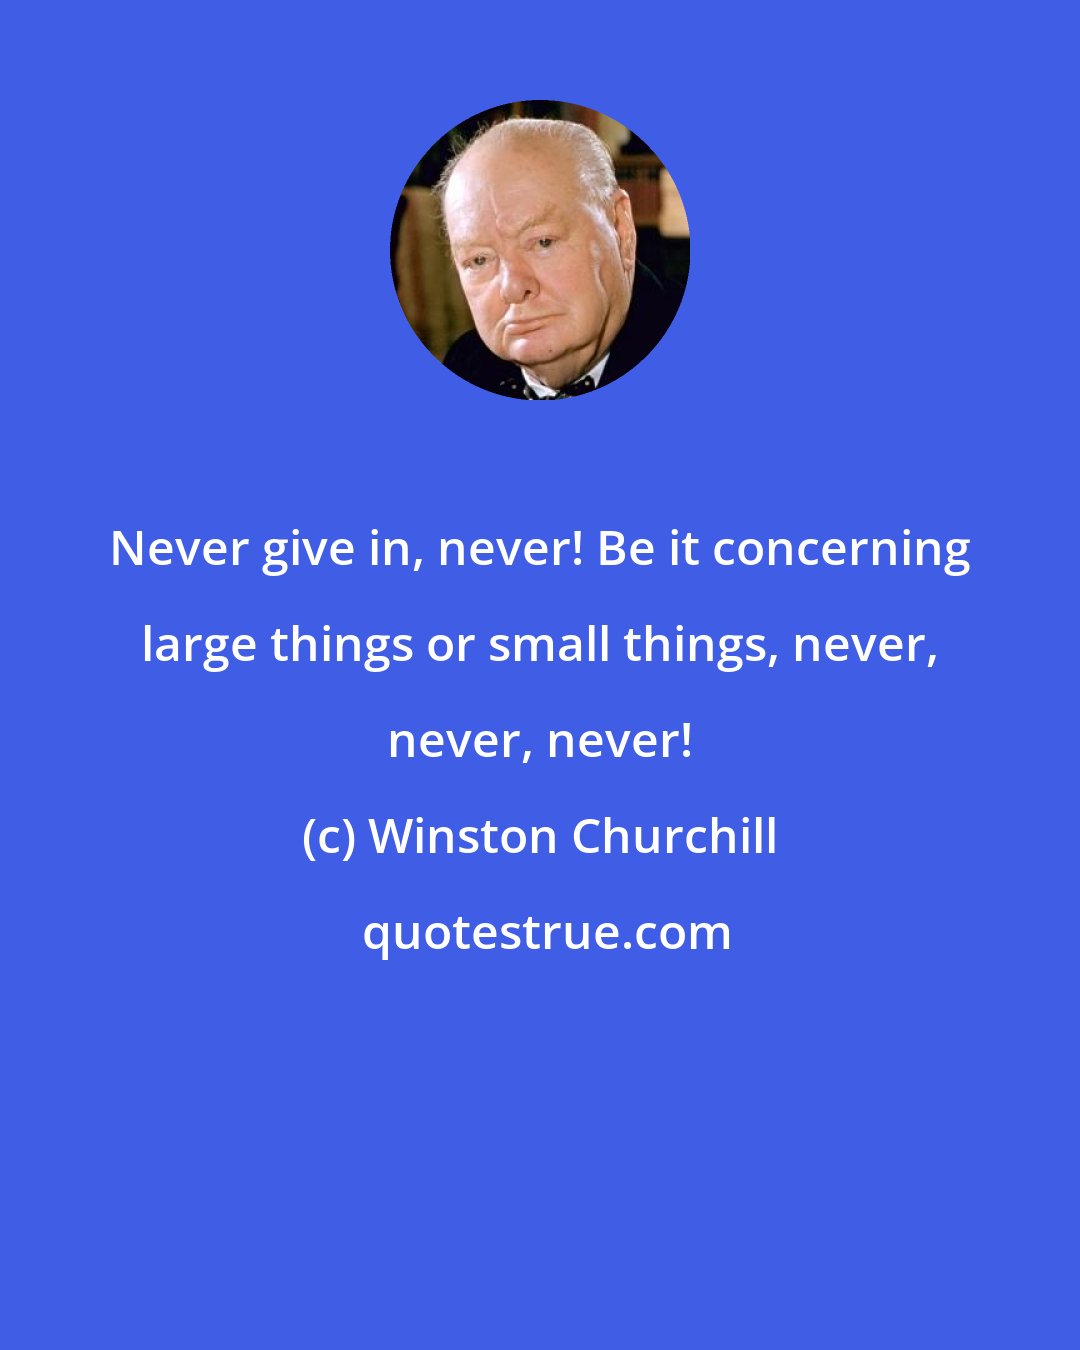 Winston Churchill: Never give in, never! Be it concerning large things or small things, never, never, never!